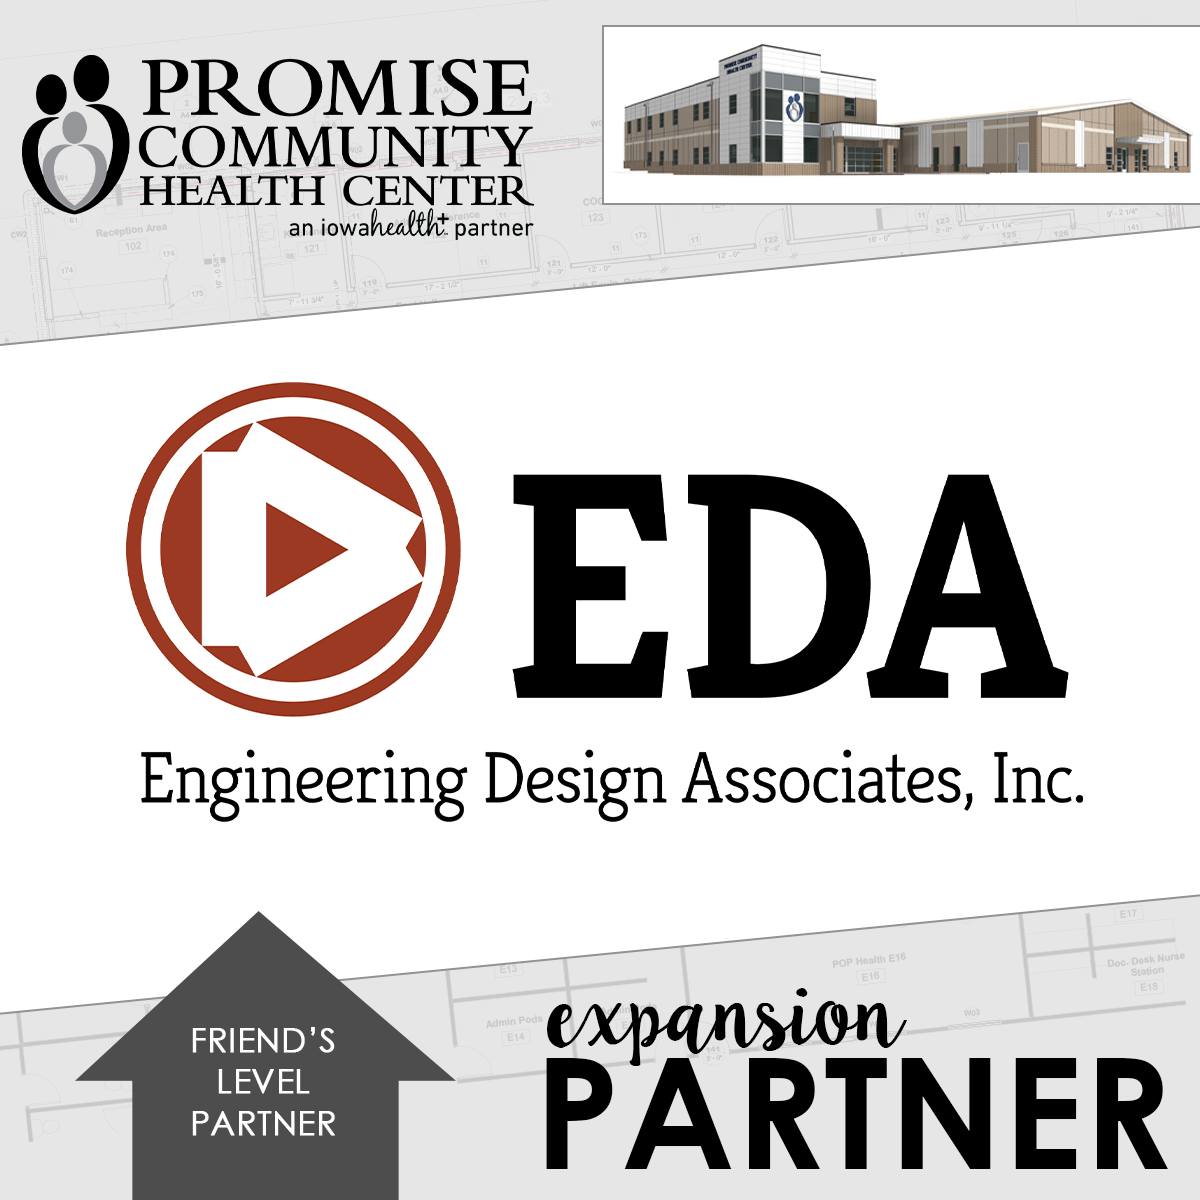 Expansion Partners |Promise Community Health Center in Sioux Center, Iowa | Promise offers medical care, prenatal care, behavioral healthcare, population health care as well as dental and vision care,  nurse health coaching, clinical pharmacy and affordable medications, lab services and immunizations, interpretation and translation, and various other services.